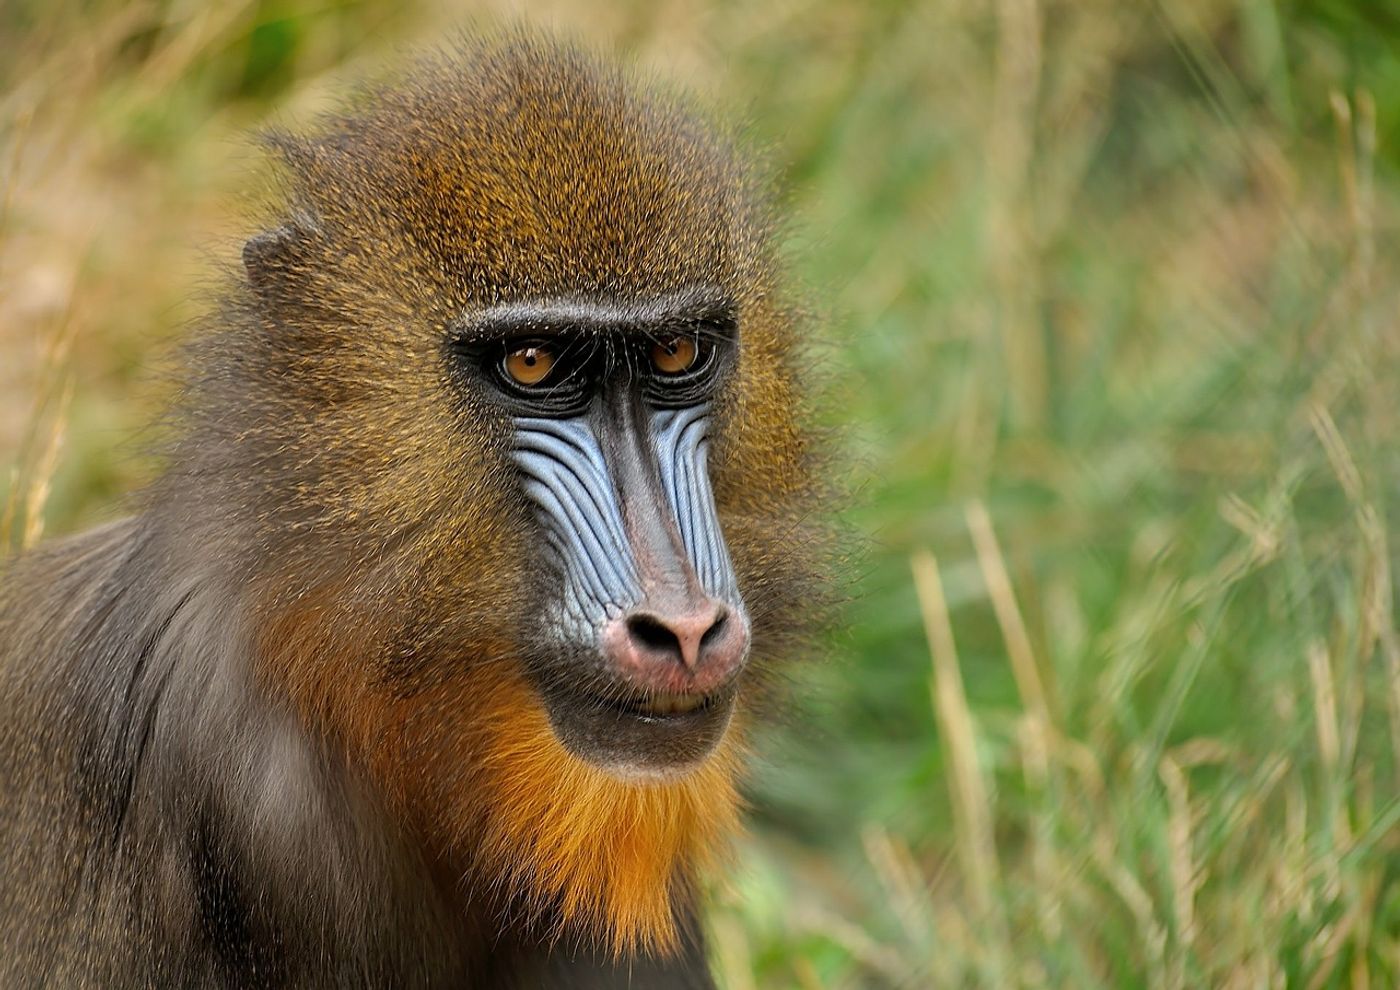 Mandrills check other members' poop for parasites before grooming them.